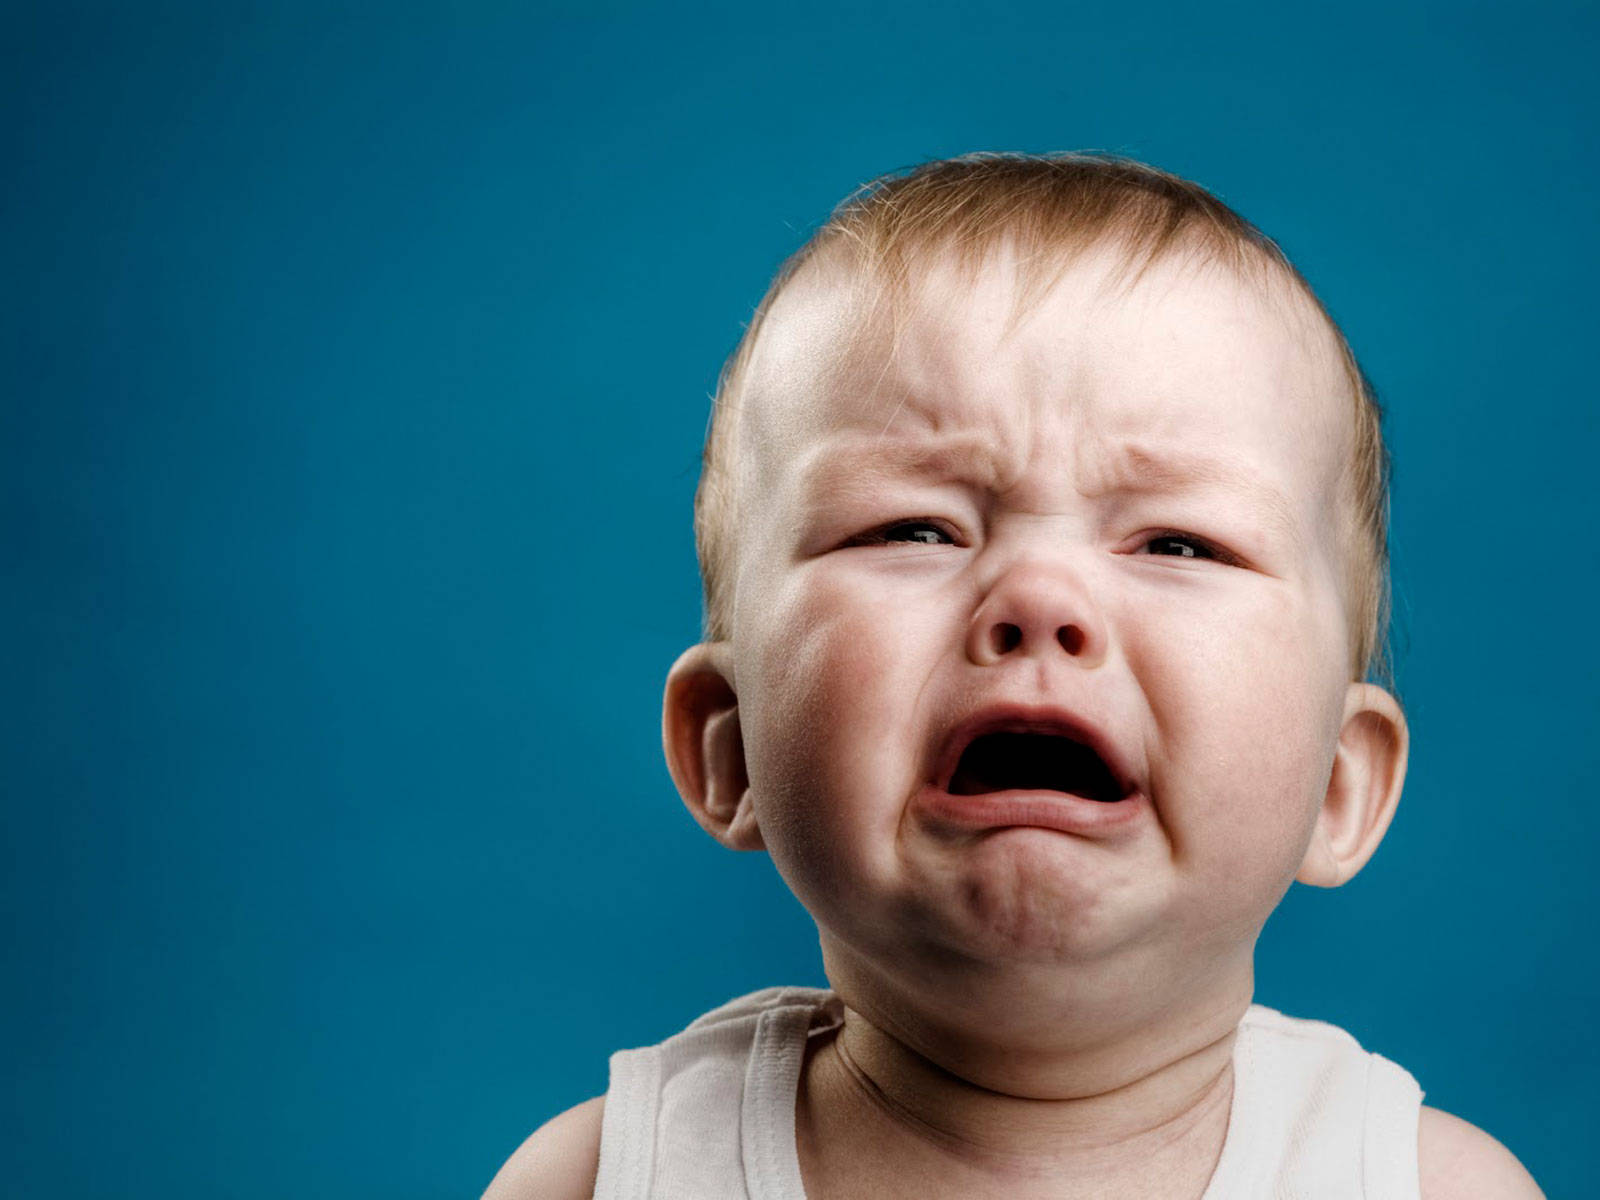 Funny Baby Crying Background